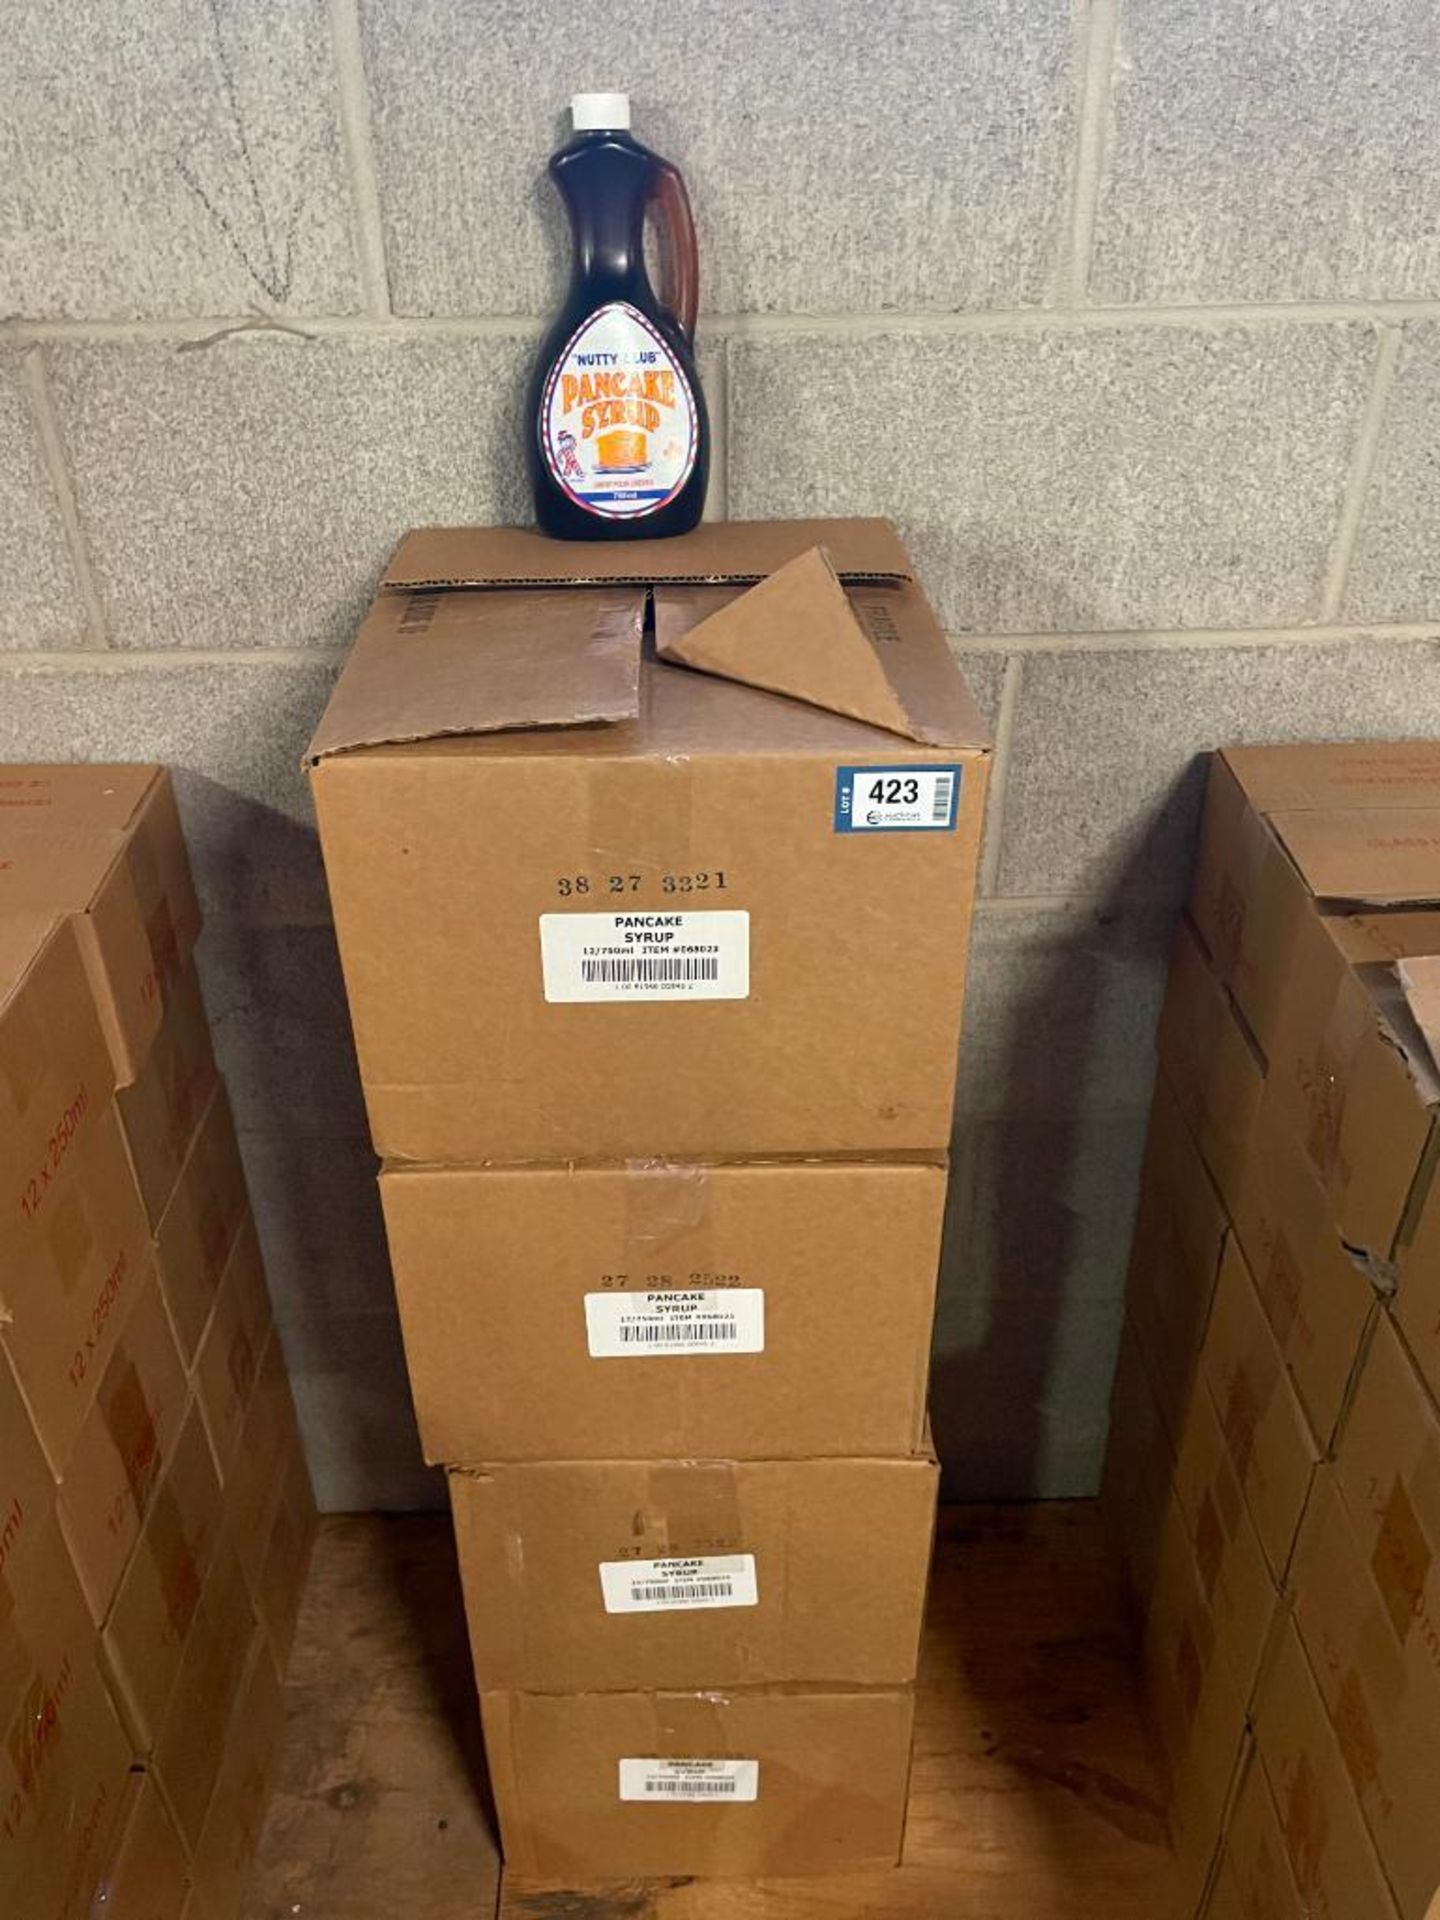 APPROX. (4) BOXES OF NUTTY CLUB PANCAKE SYRUP, 12/750MLBOTTLE PER BOX